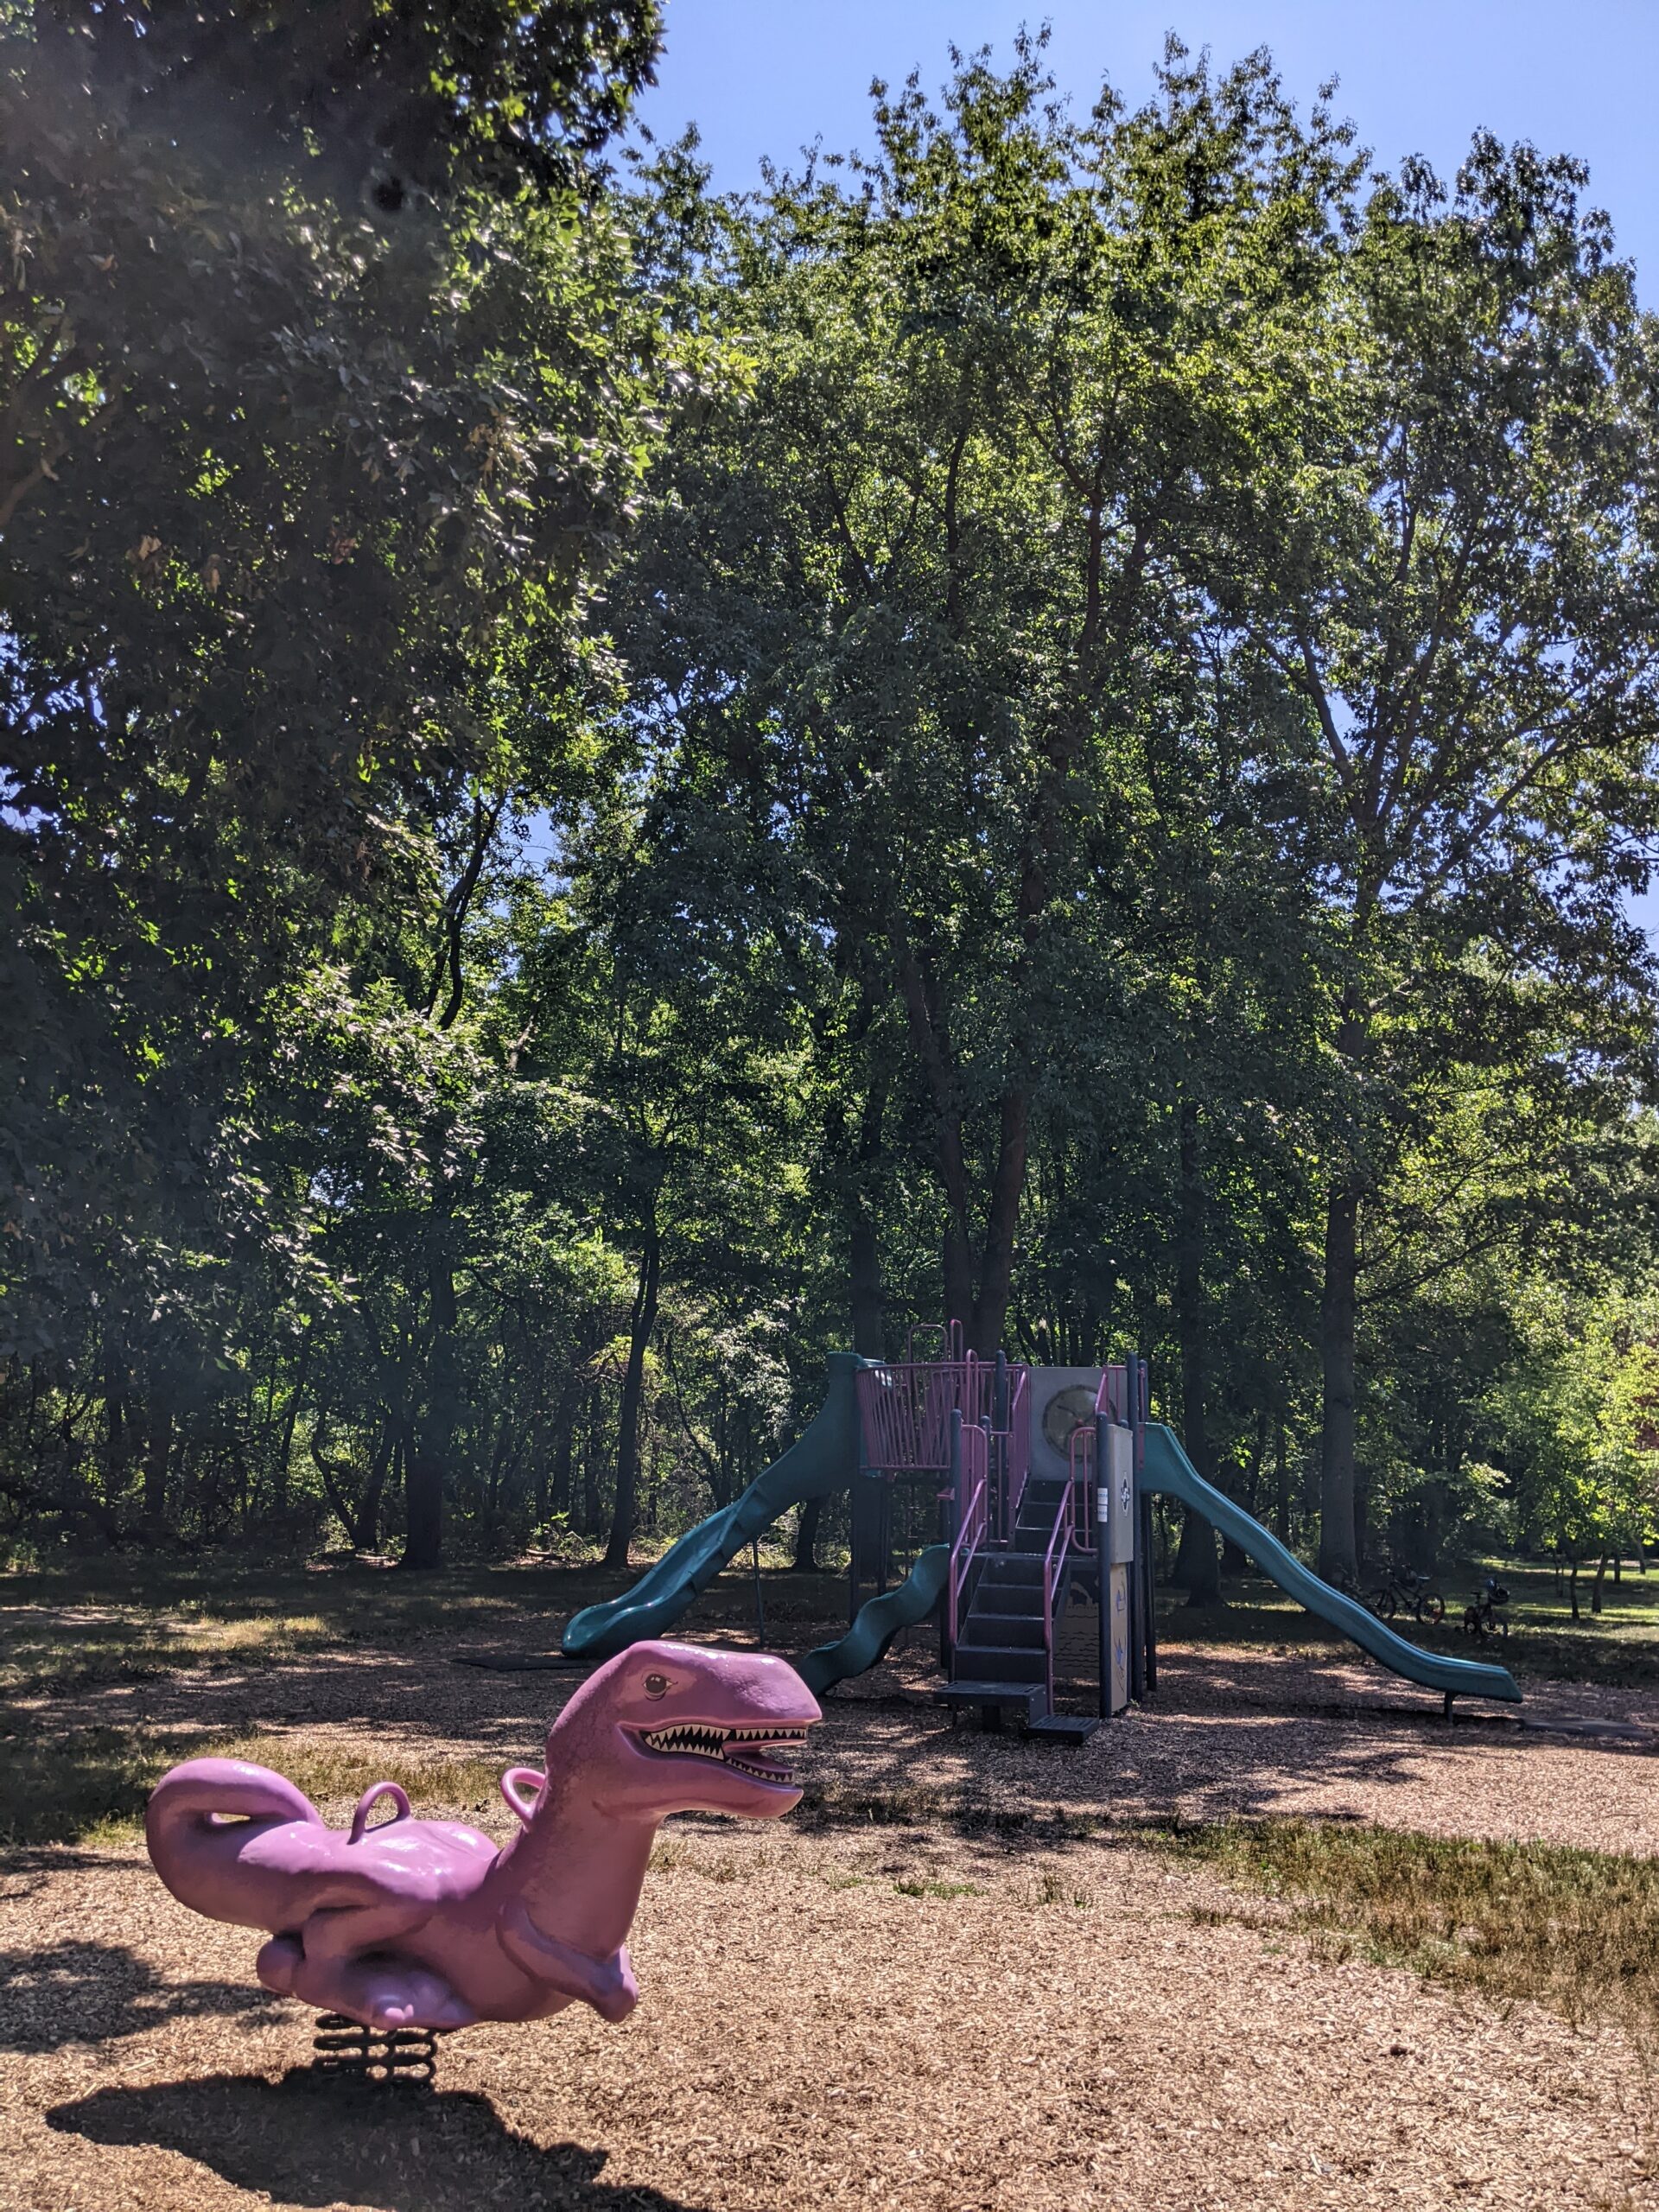 Children's Park Playground at Veteran's Park in Hamilton Township NJ - TALL image - green and purple playground with ride on springy dinosaur